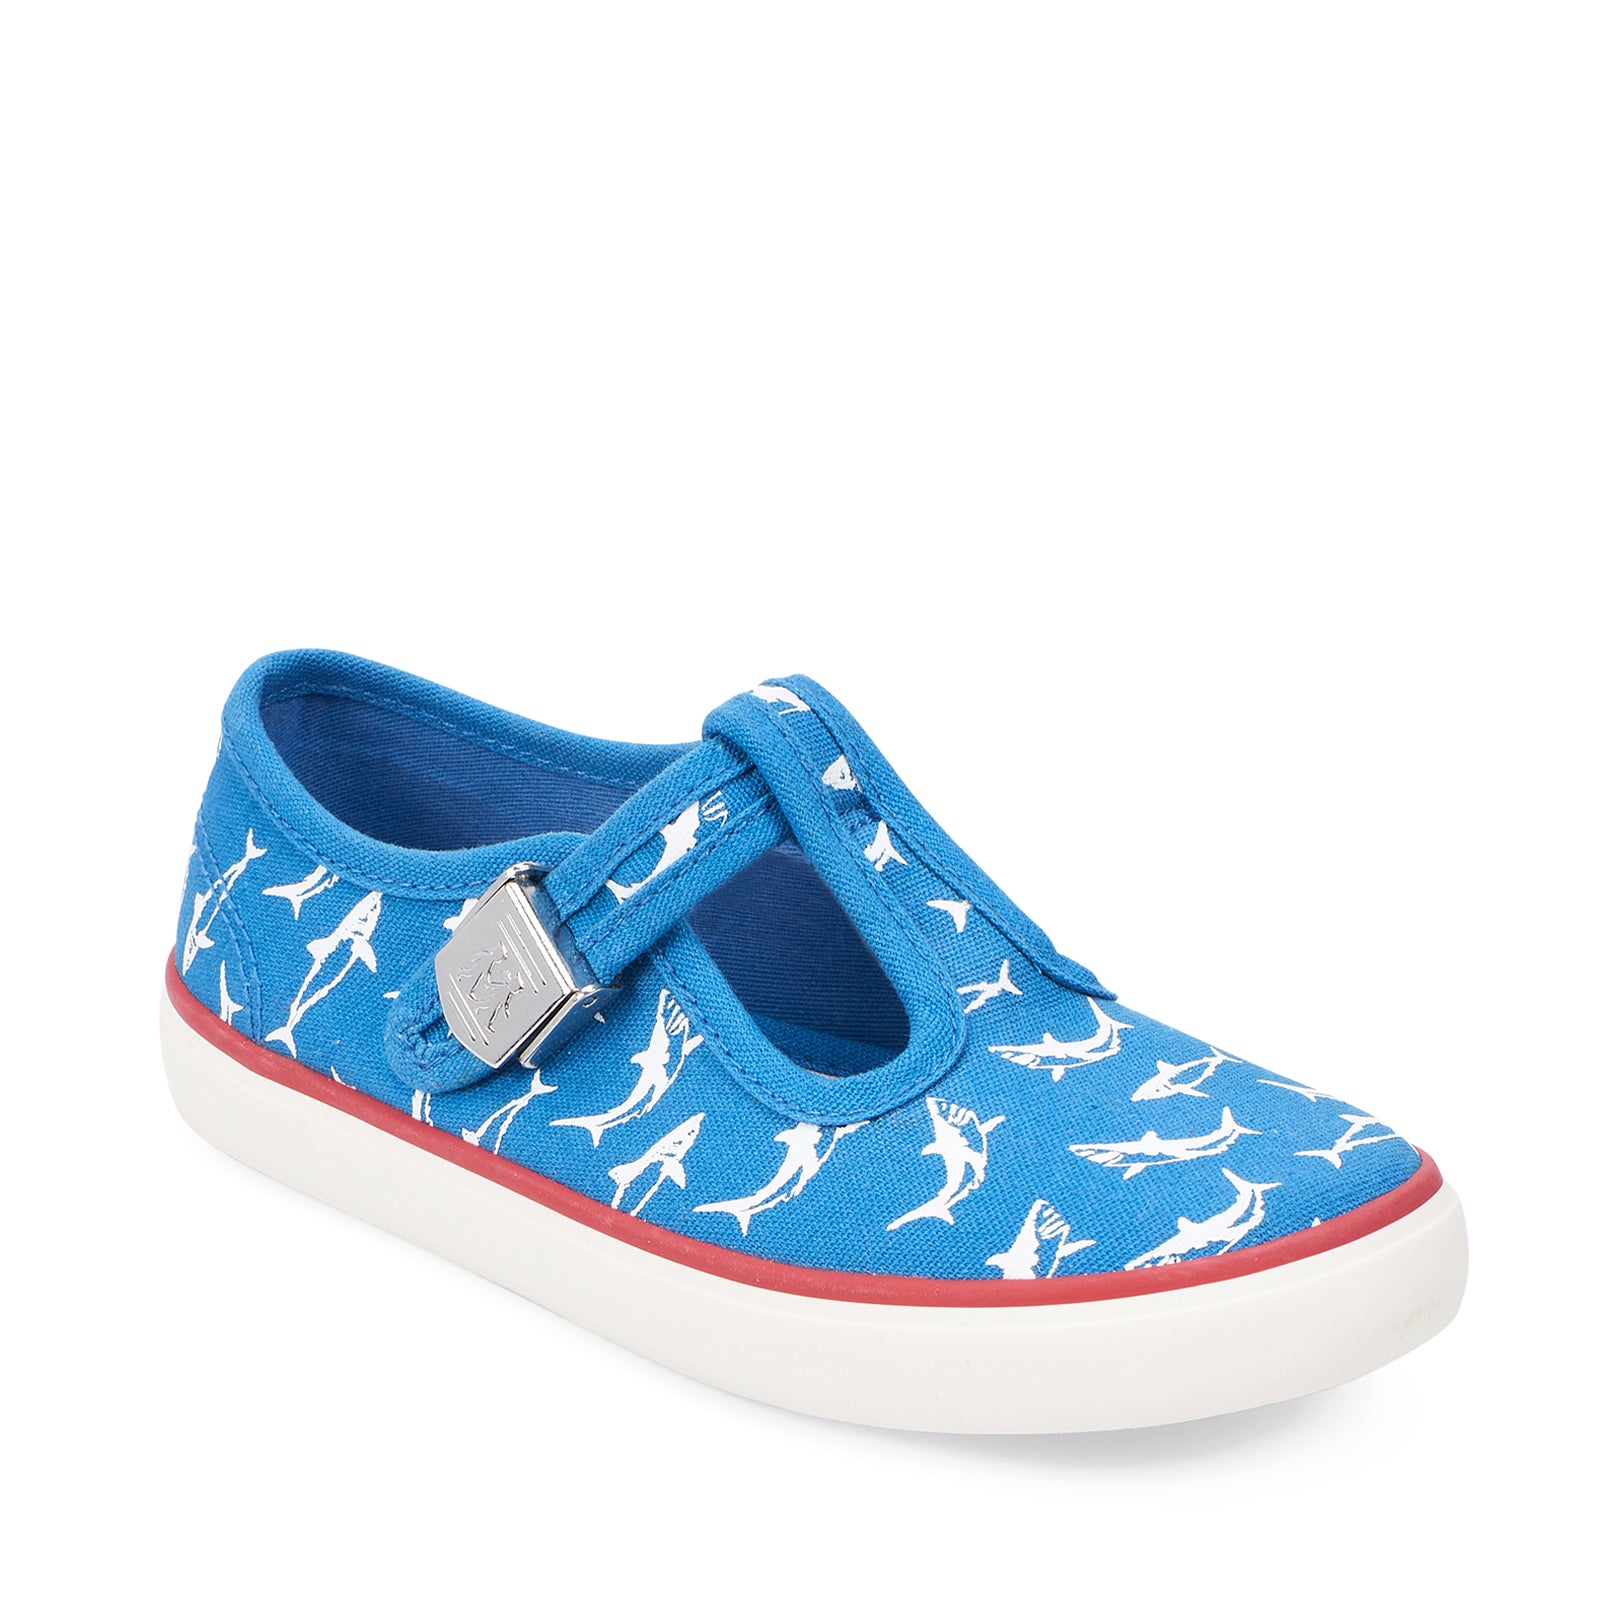 A boys canvas T-Bar shoe by Start Rite, style Surf, in blue with white shark print and buckle fastening. Angled view.